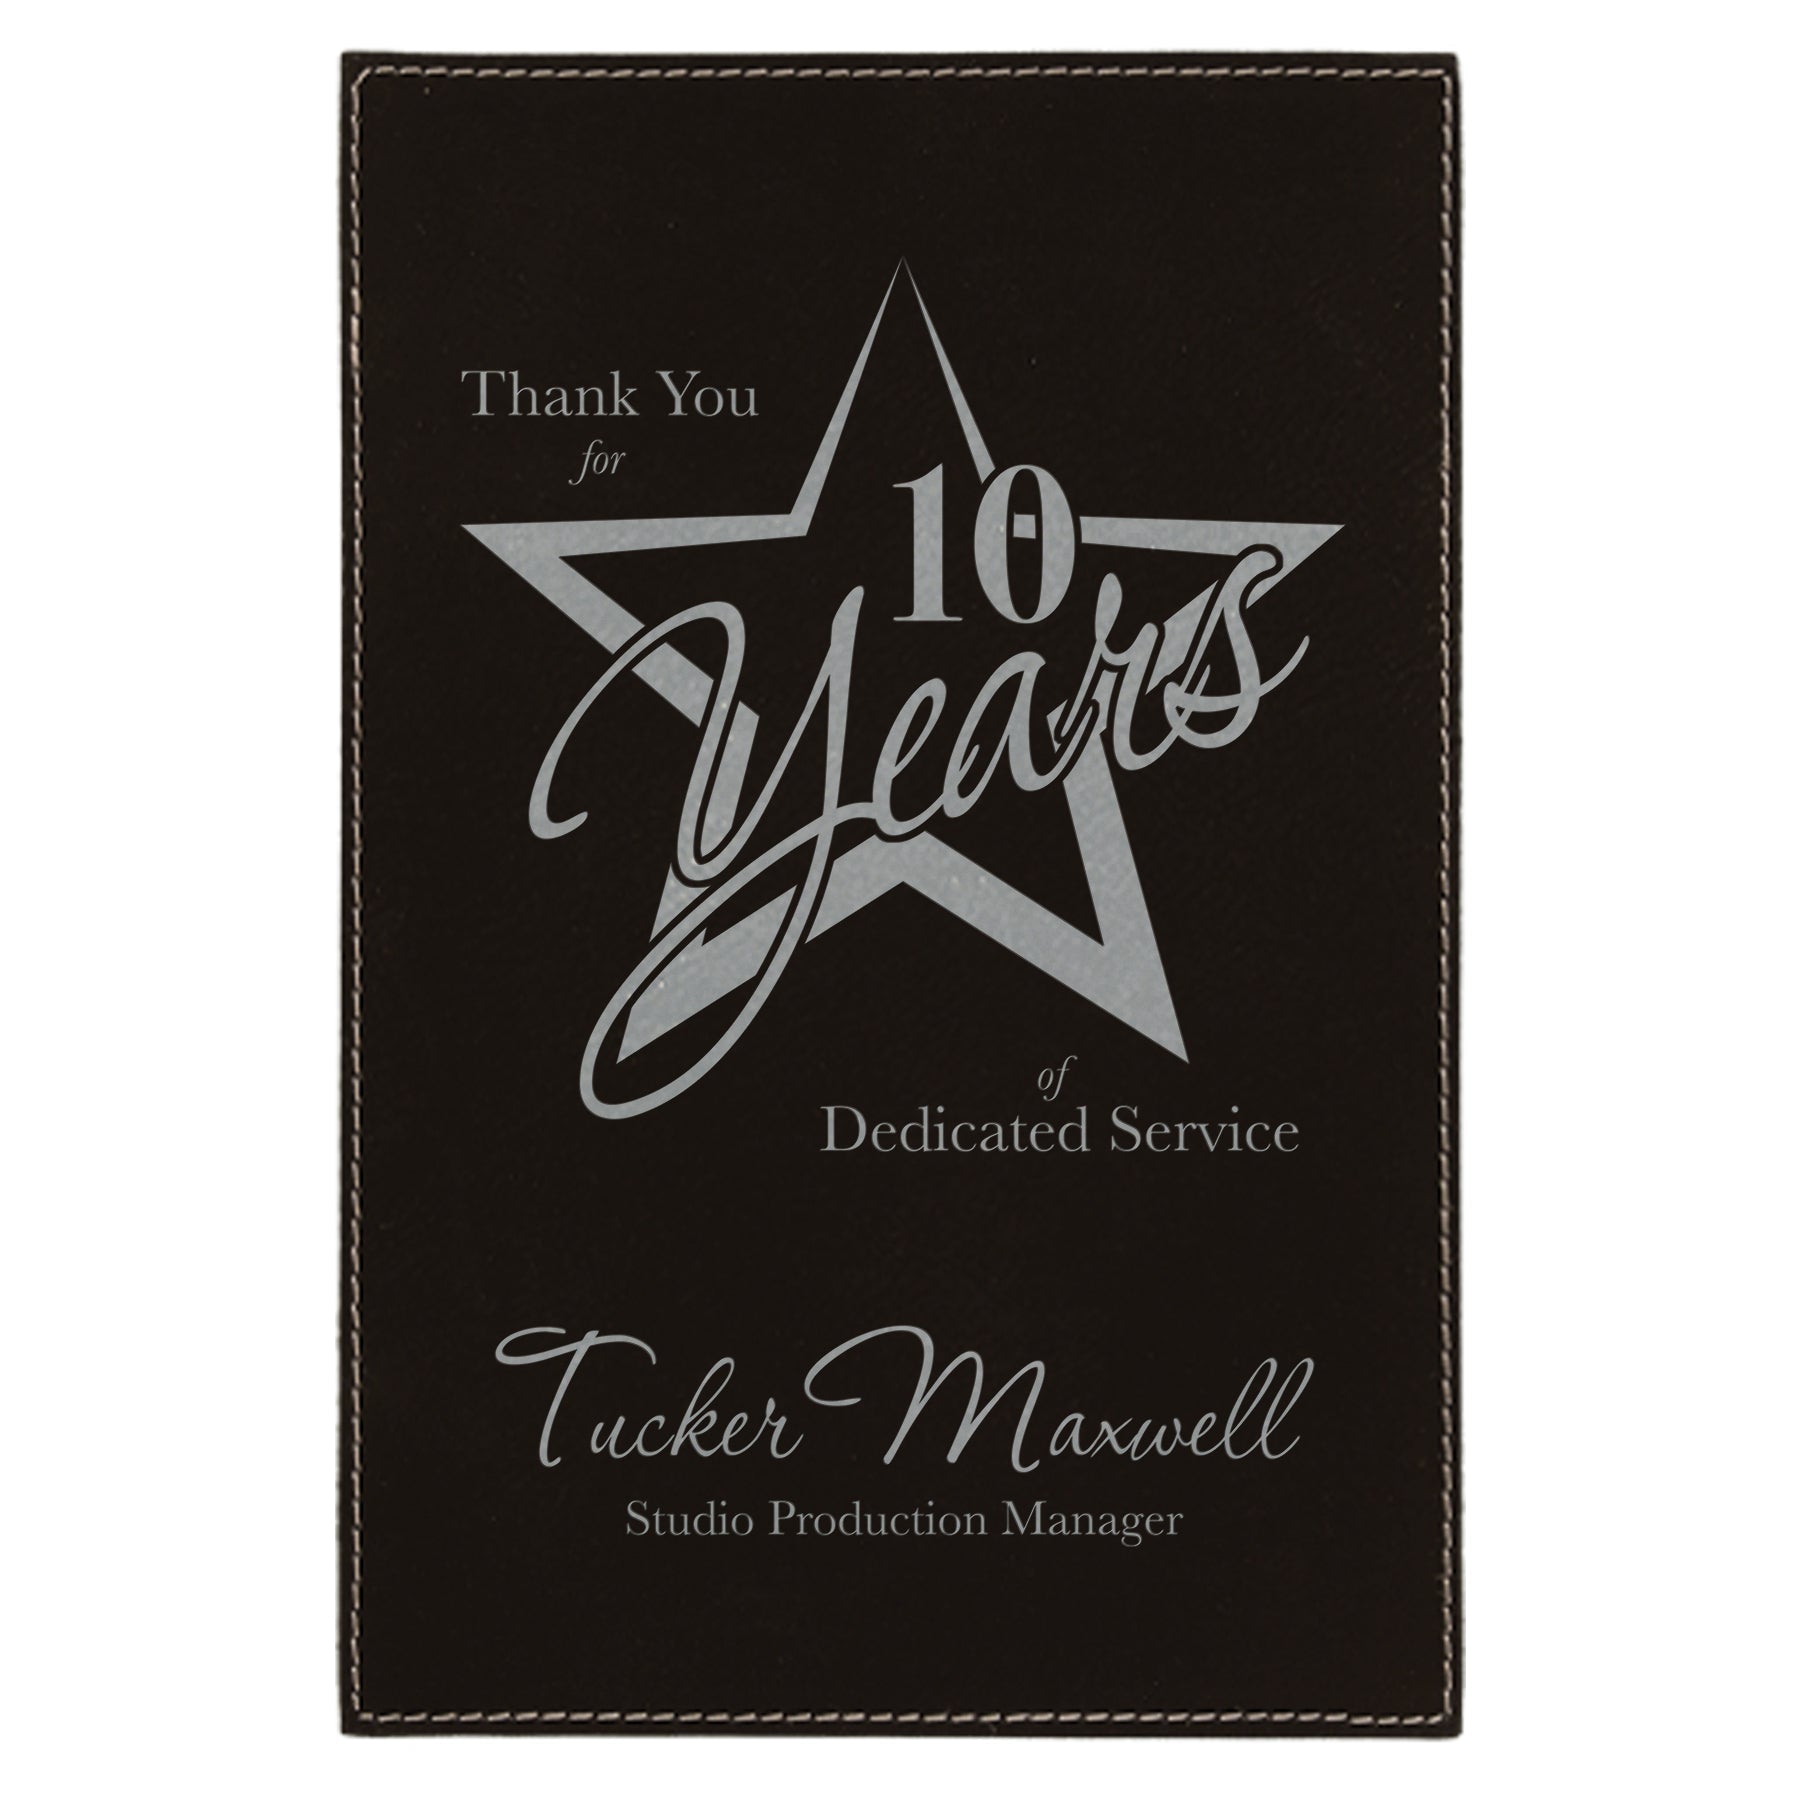 Plaque Plate, Laserable Leatherette, 5" x 7", Laser Engraved Plaque Plate Craftworks NW Black/Silver 